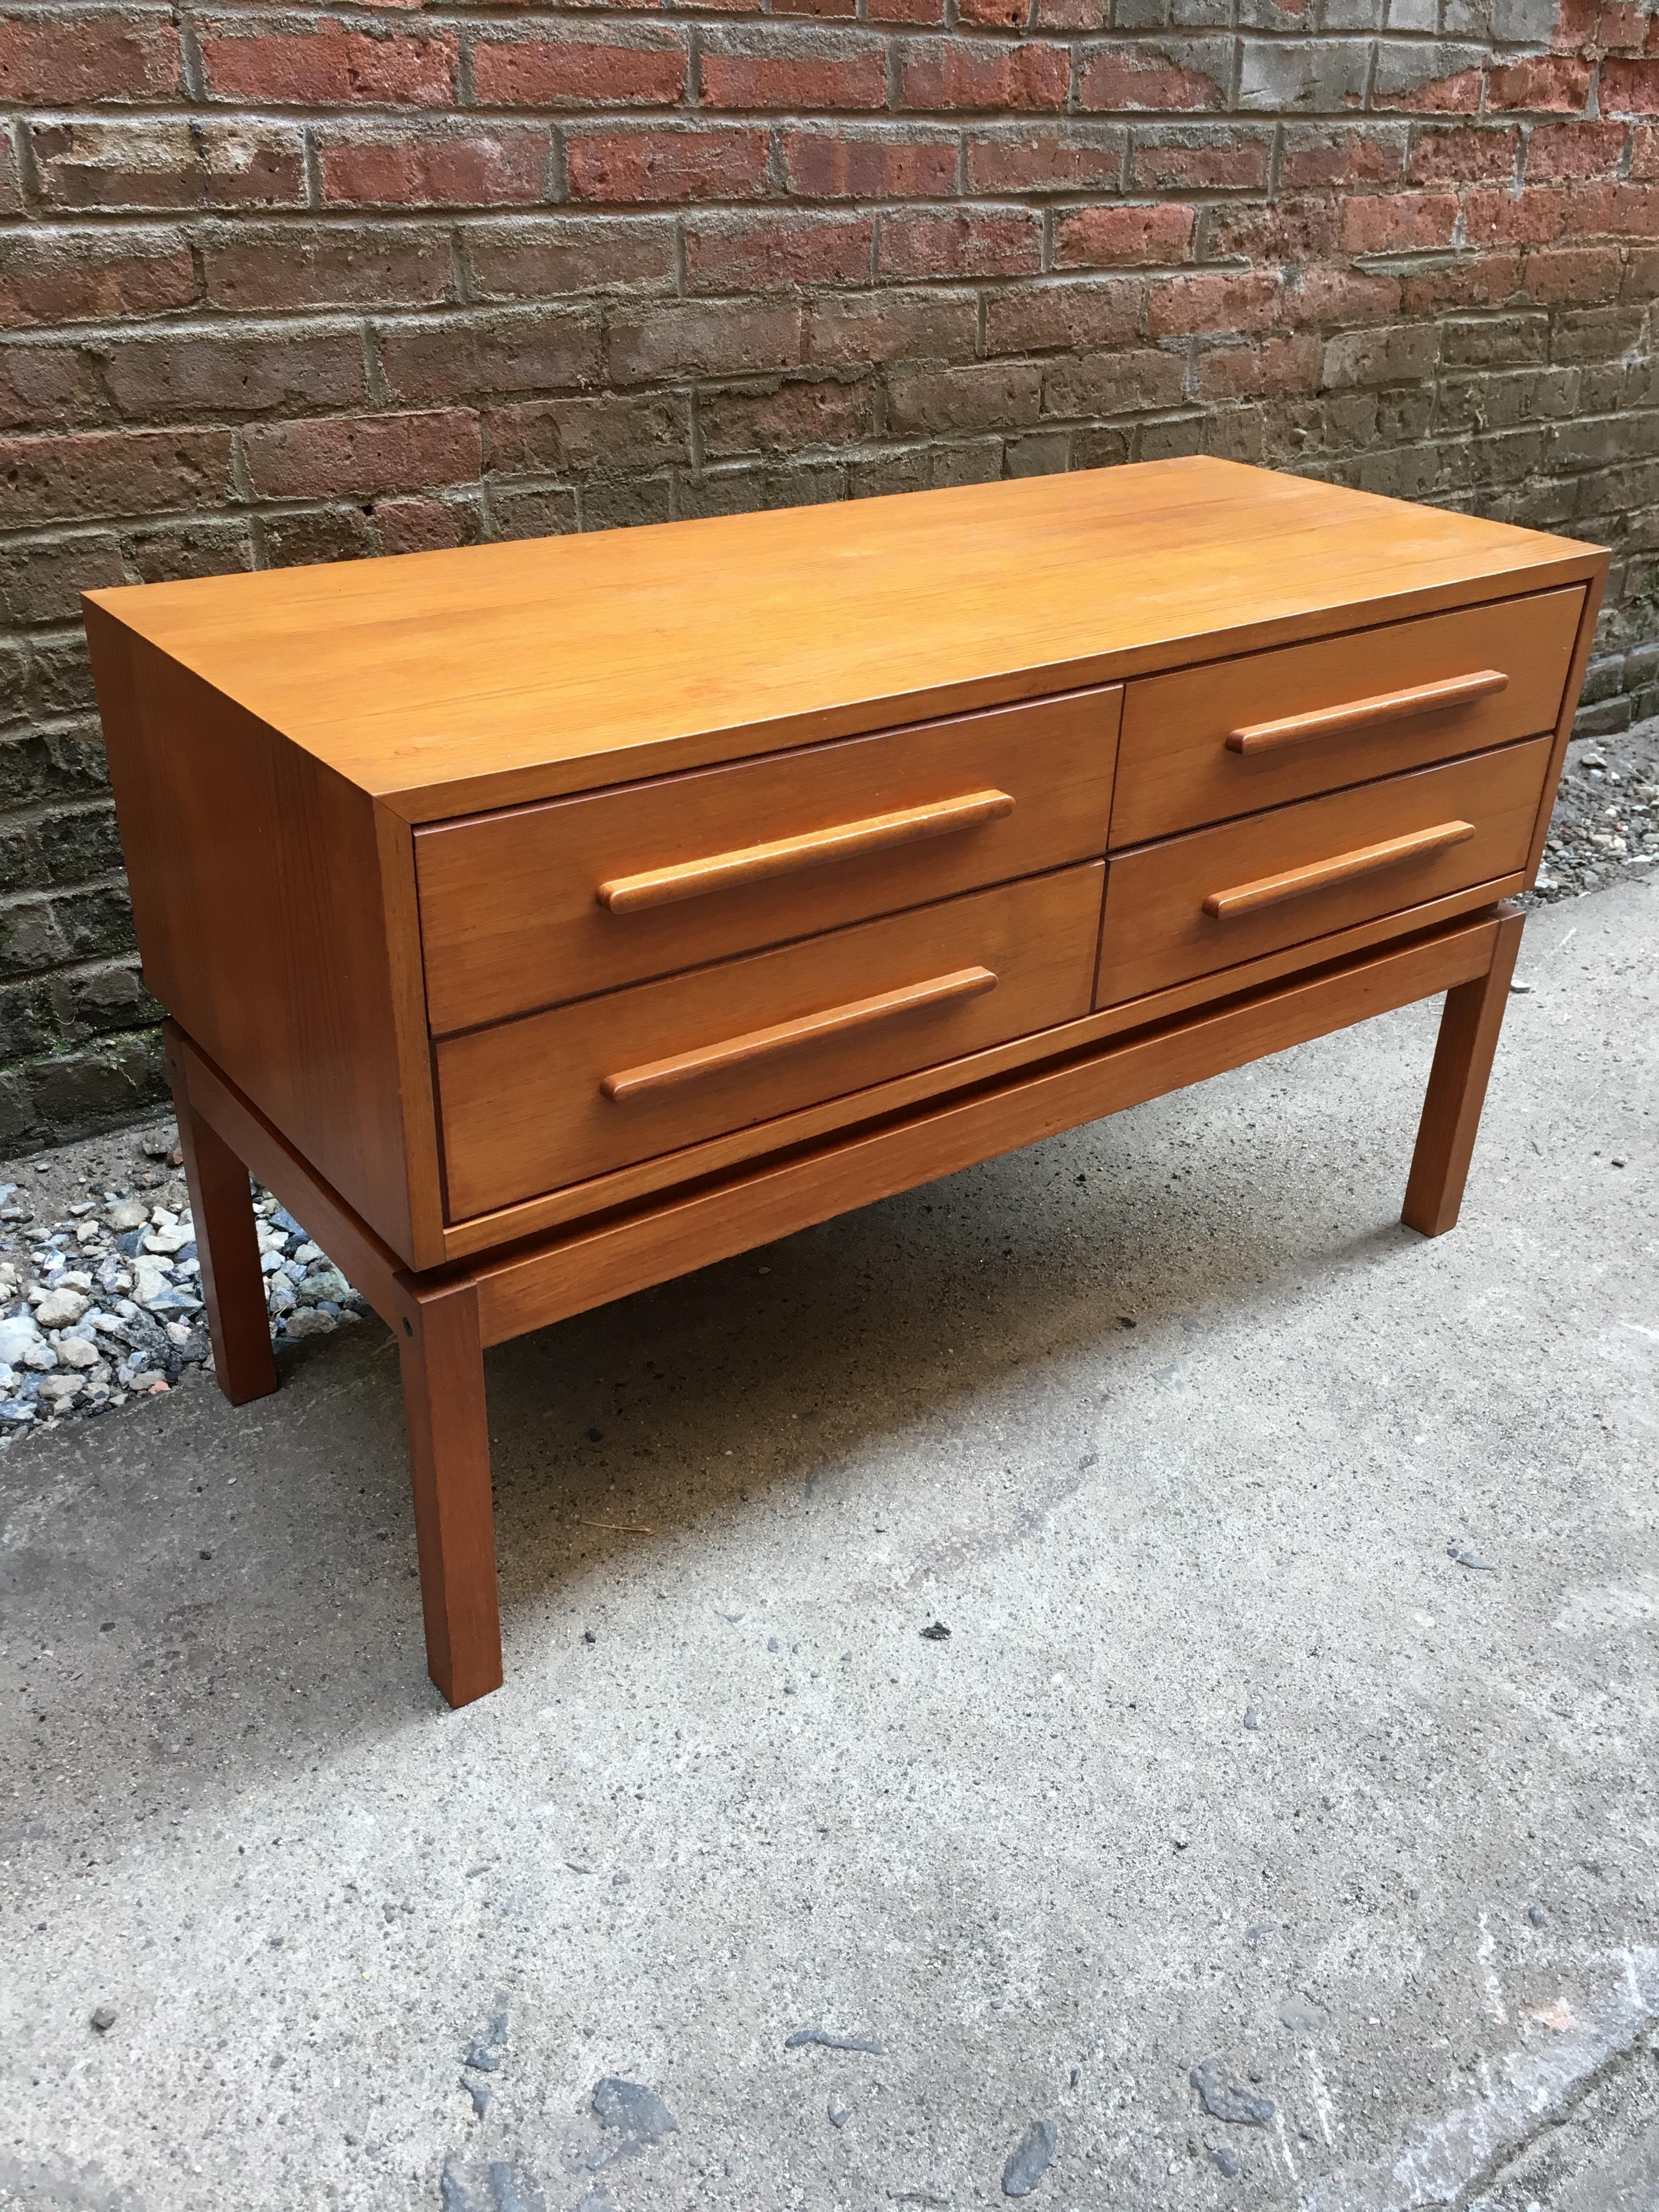 Teak construction four drawer low dresser or console. Solid teak legs. Attributed to Breistein Mobelfabrikk, Norway. Very clean and room ready. Unsigned.